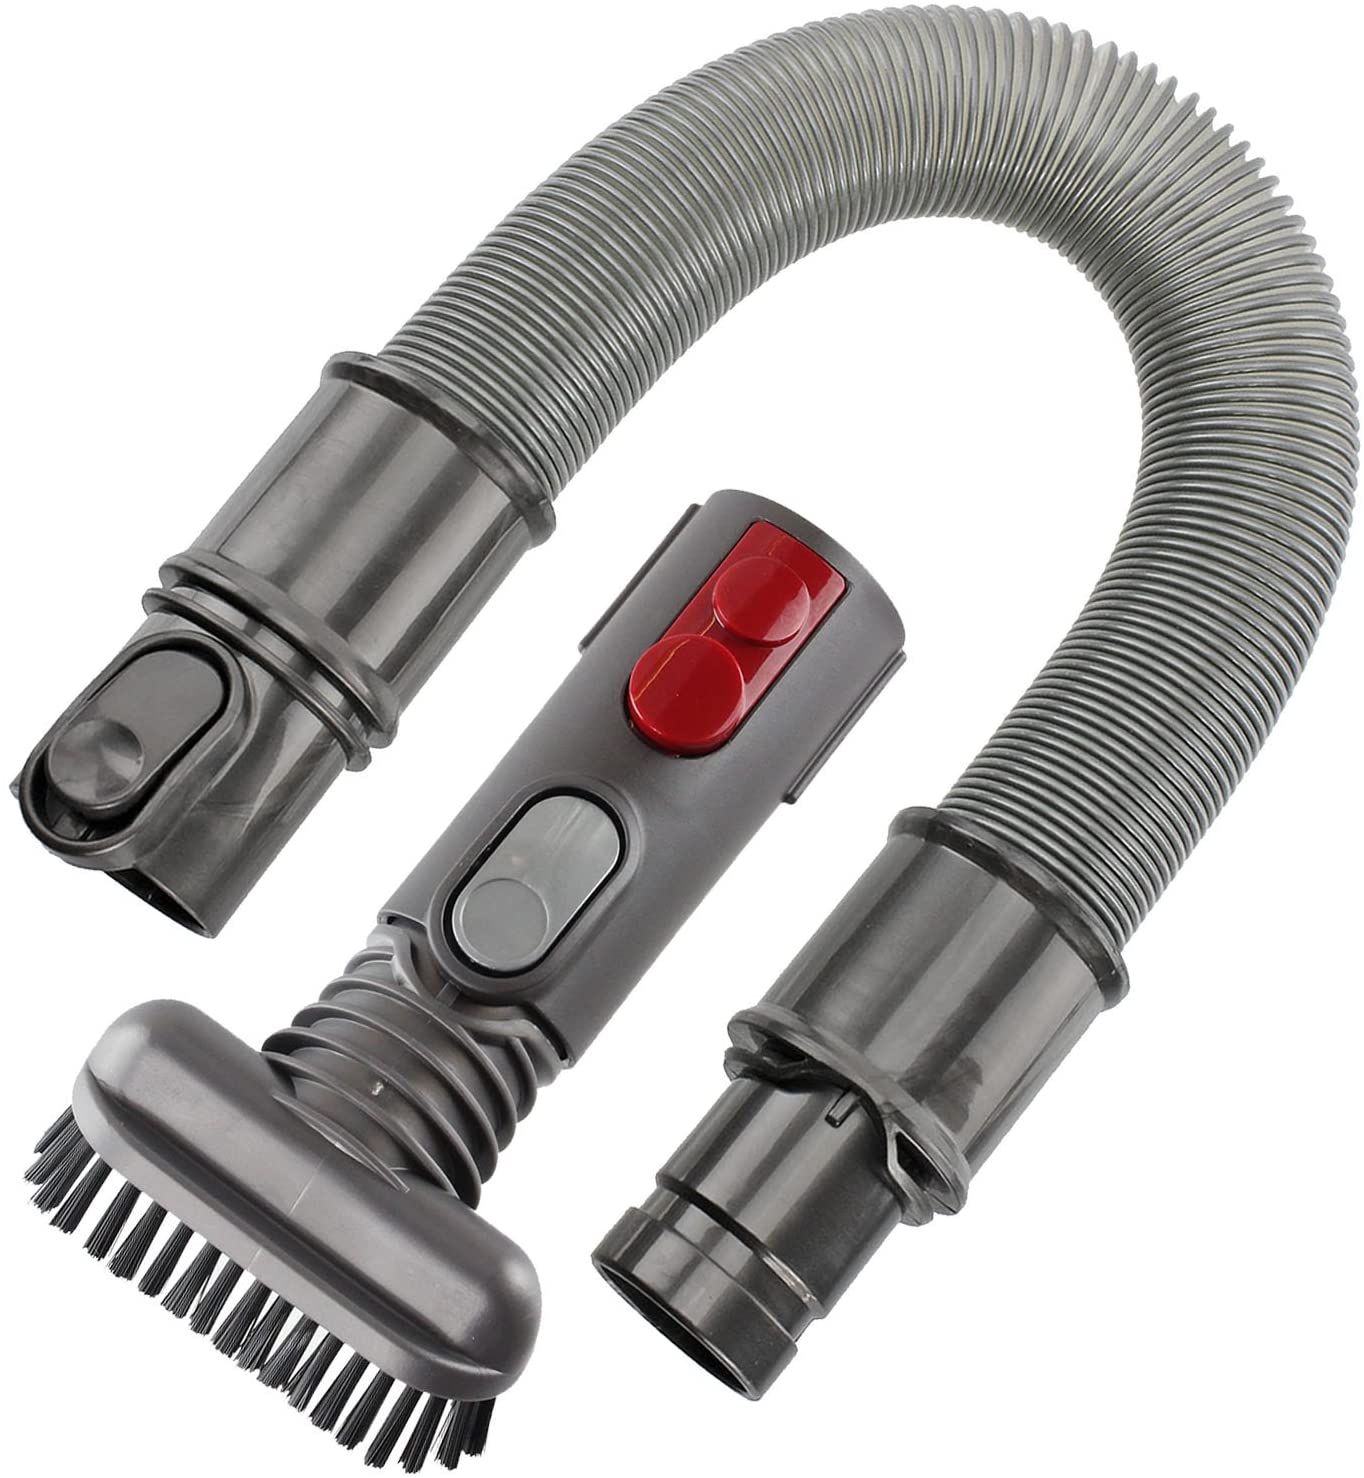 1.4m Compact Extension Hose + Stubborn Dirt Brush Kit for Dyson CY22 CY23 Cinetic Big Ball Animal Vacuum Cleaner